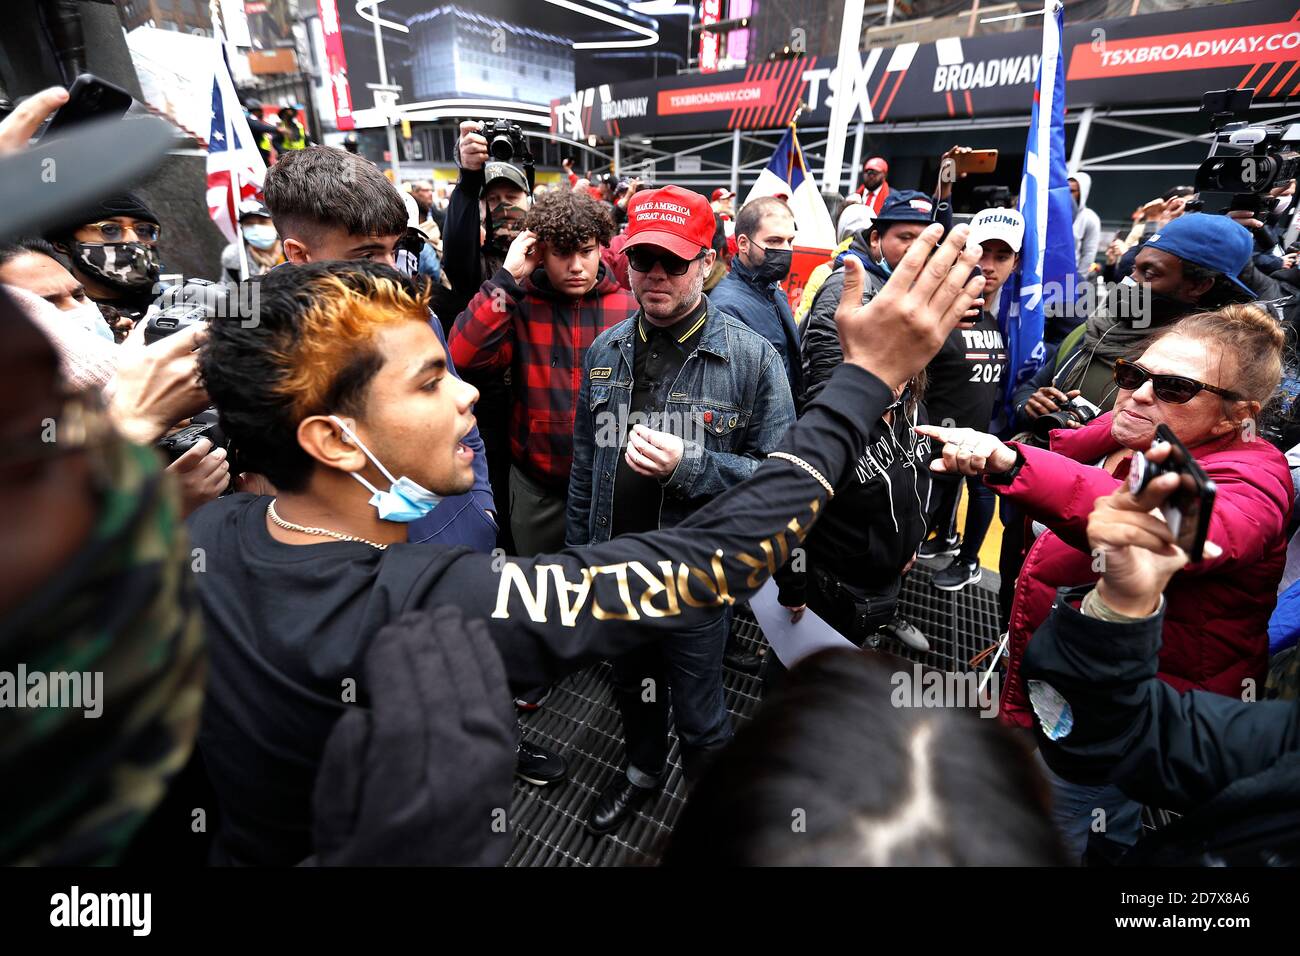 New York City, USA. 25th Oct, 2020. Pro Trump supporters clash with left-wing demonstrators following a march to Times Square on October 25, 2020 in New York City. As the November 3rd Presidential Election nears, tensions are high on both political lsides, often resulting in physical violence and police arrests. (Photo by John Lamparski/SIPA USA) Credit: Sipa USA/Alamy Live News Stock Photo